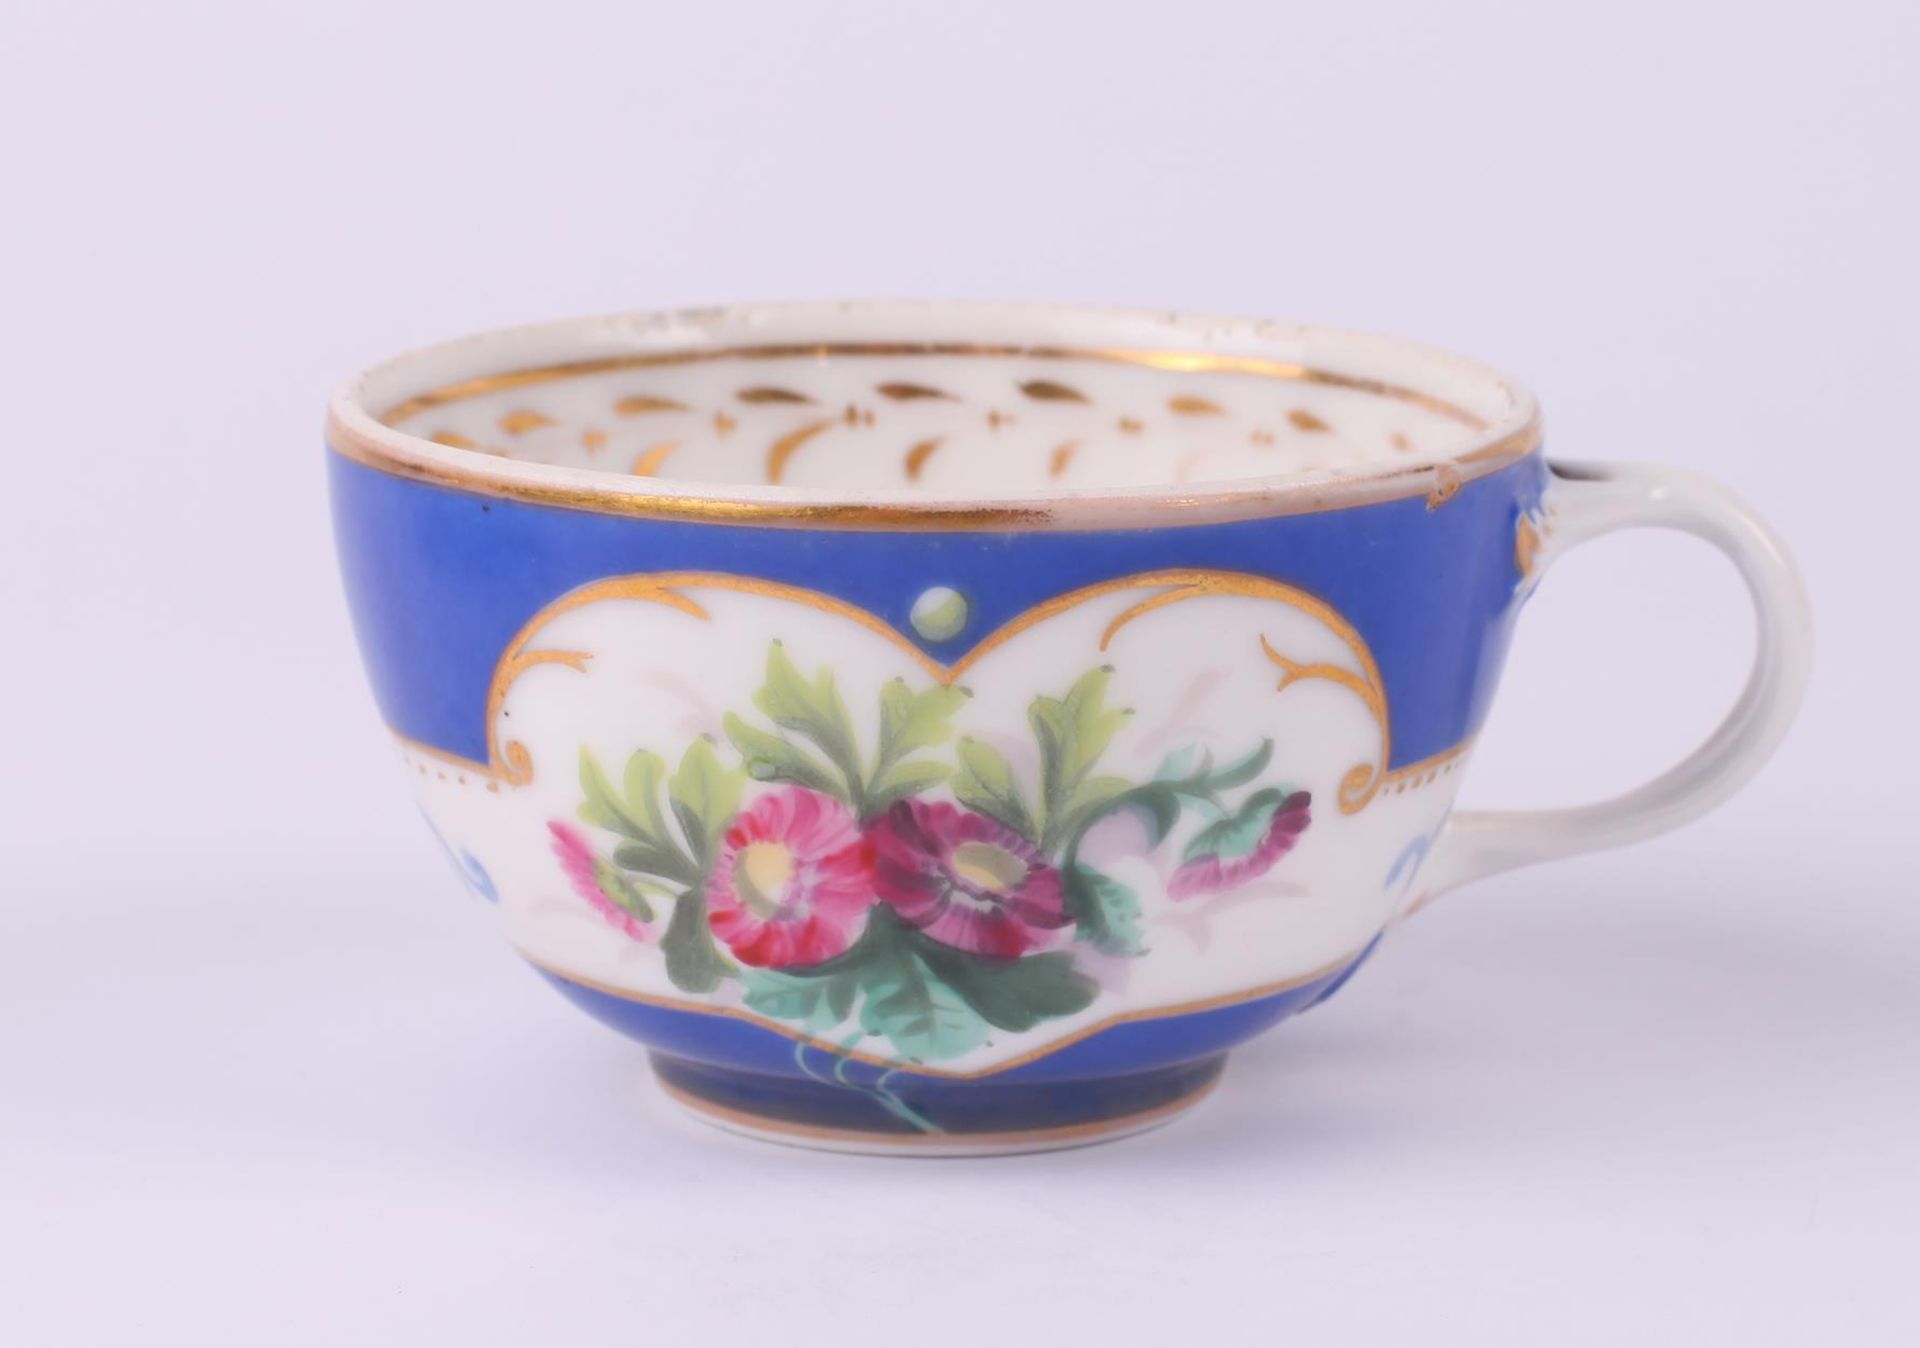 Tea cup and saucer set with floral painting. Russia. 1890s. Porcelain, painting, gilding. Cup: 5x8 - Image 3 of 13